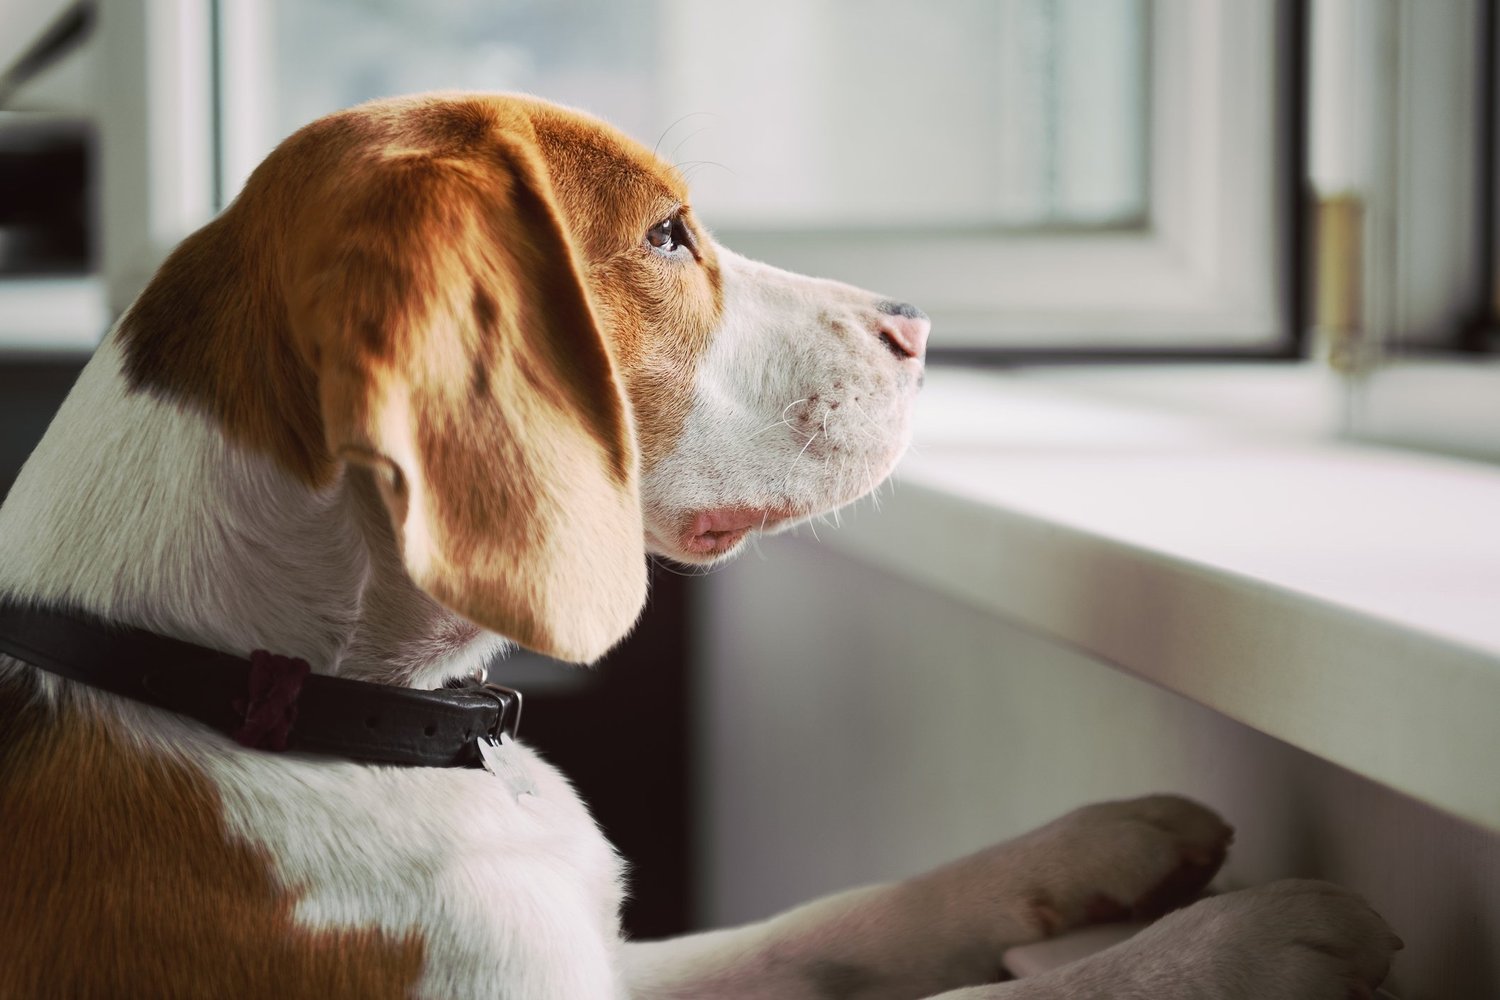 Separation Anxiety in Dogs - Causes, Symptoms, & Treatment